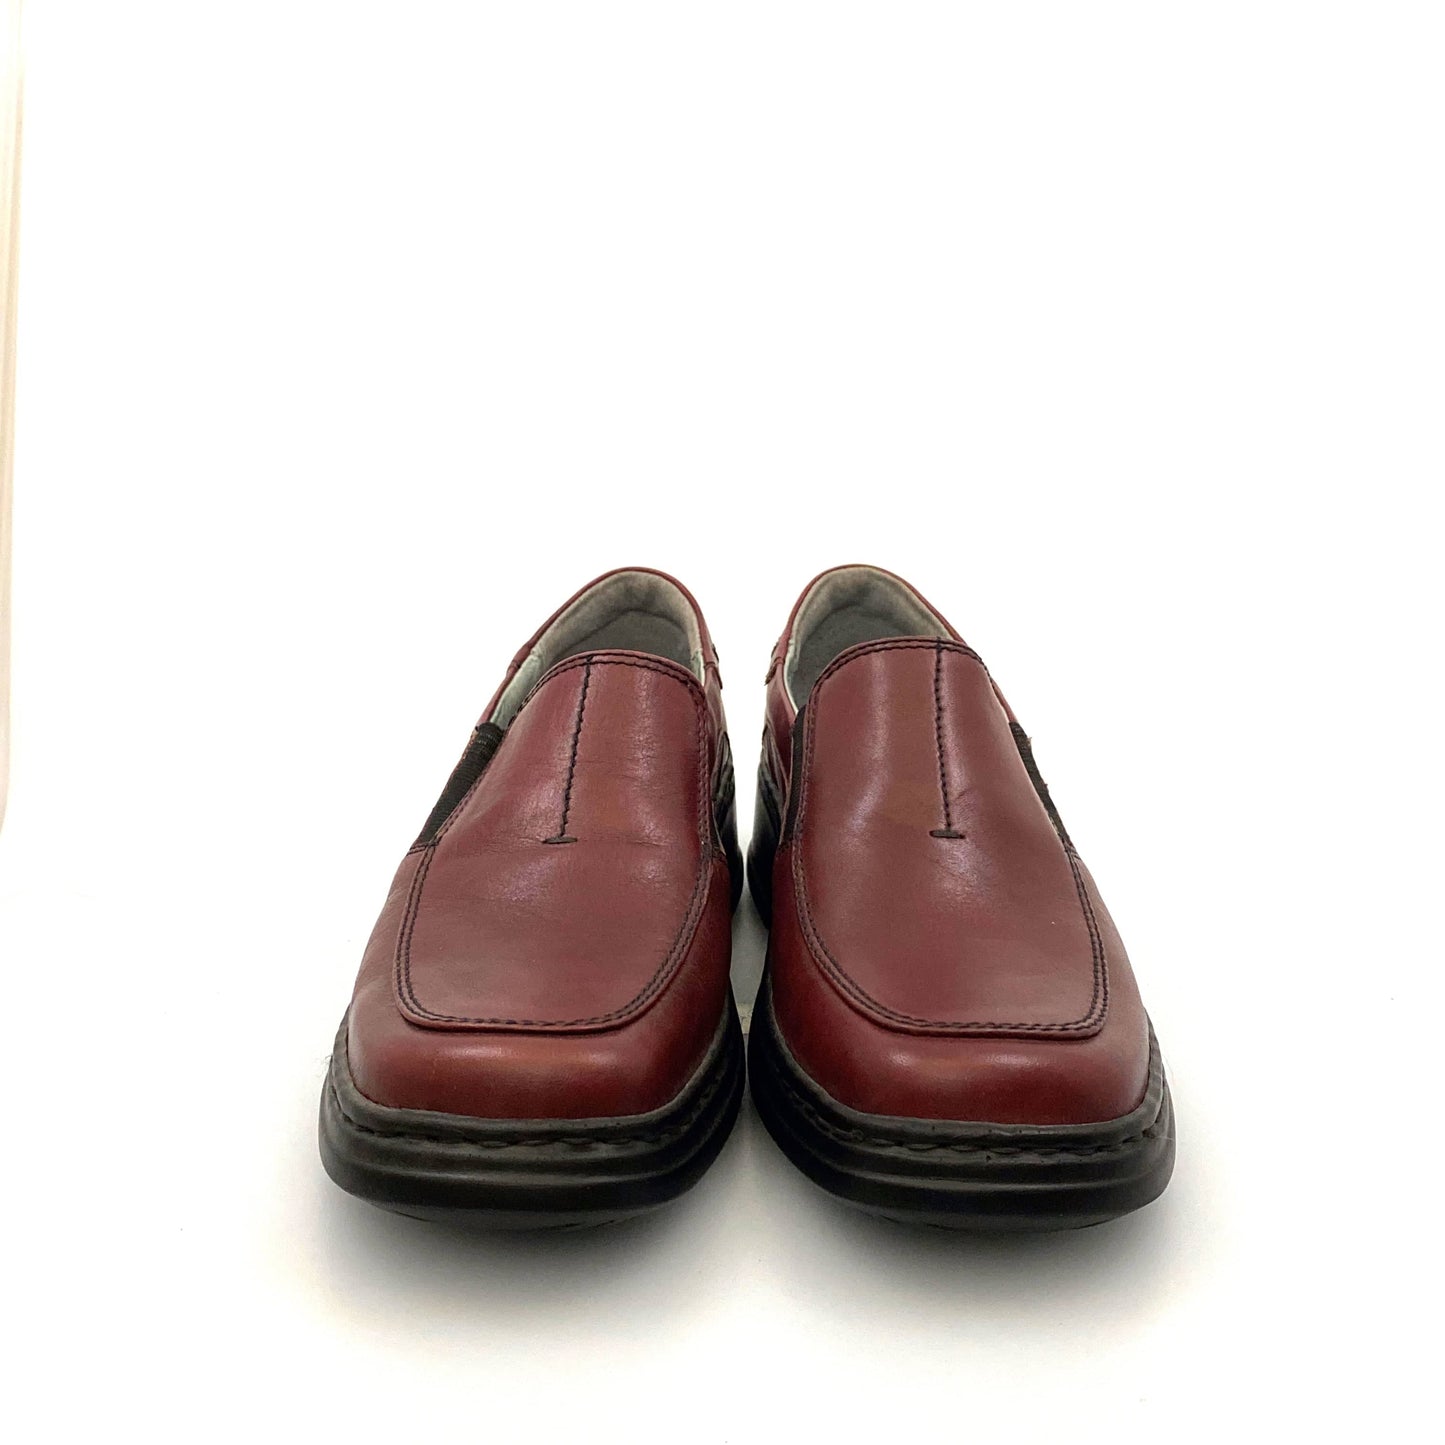 Josef Seibel Womens Size 37 Maroon Red Leather Loafers Shoes